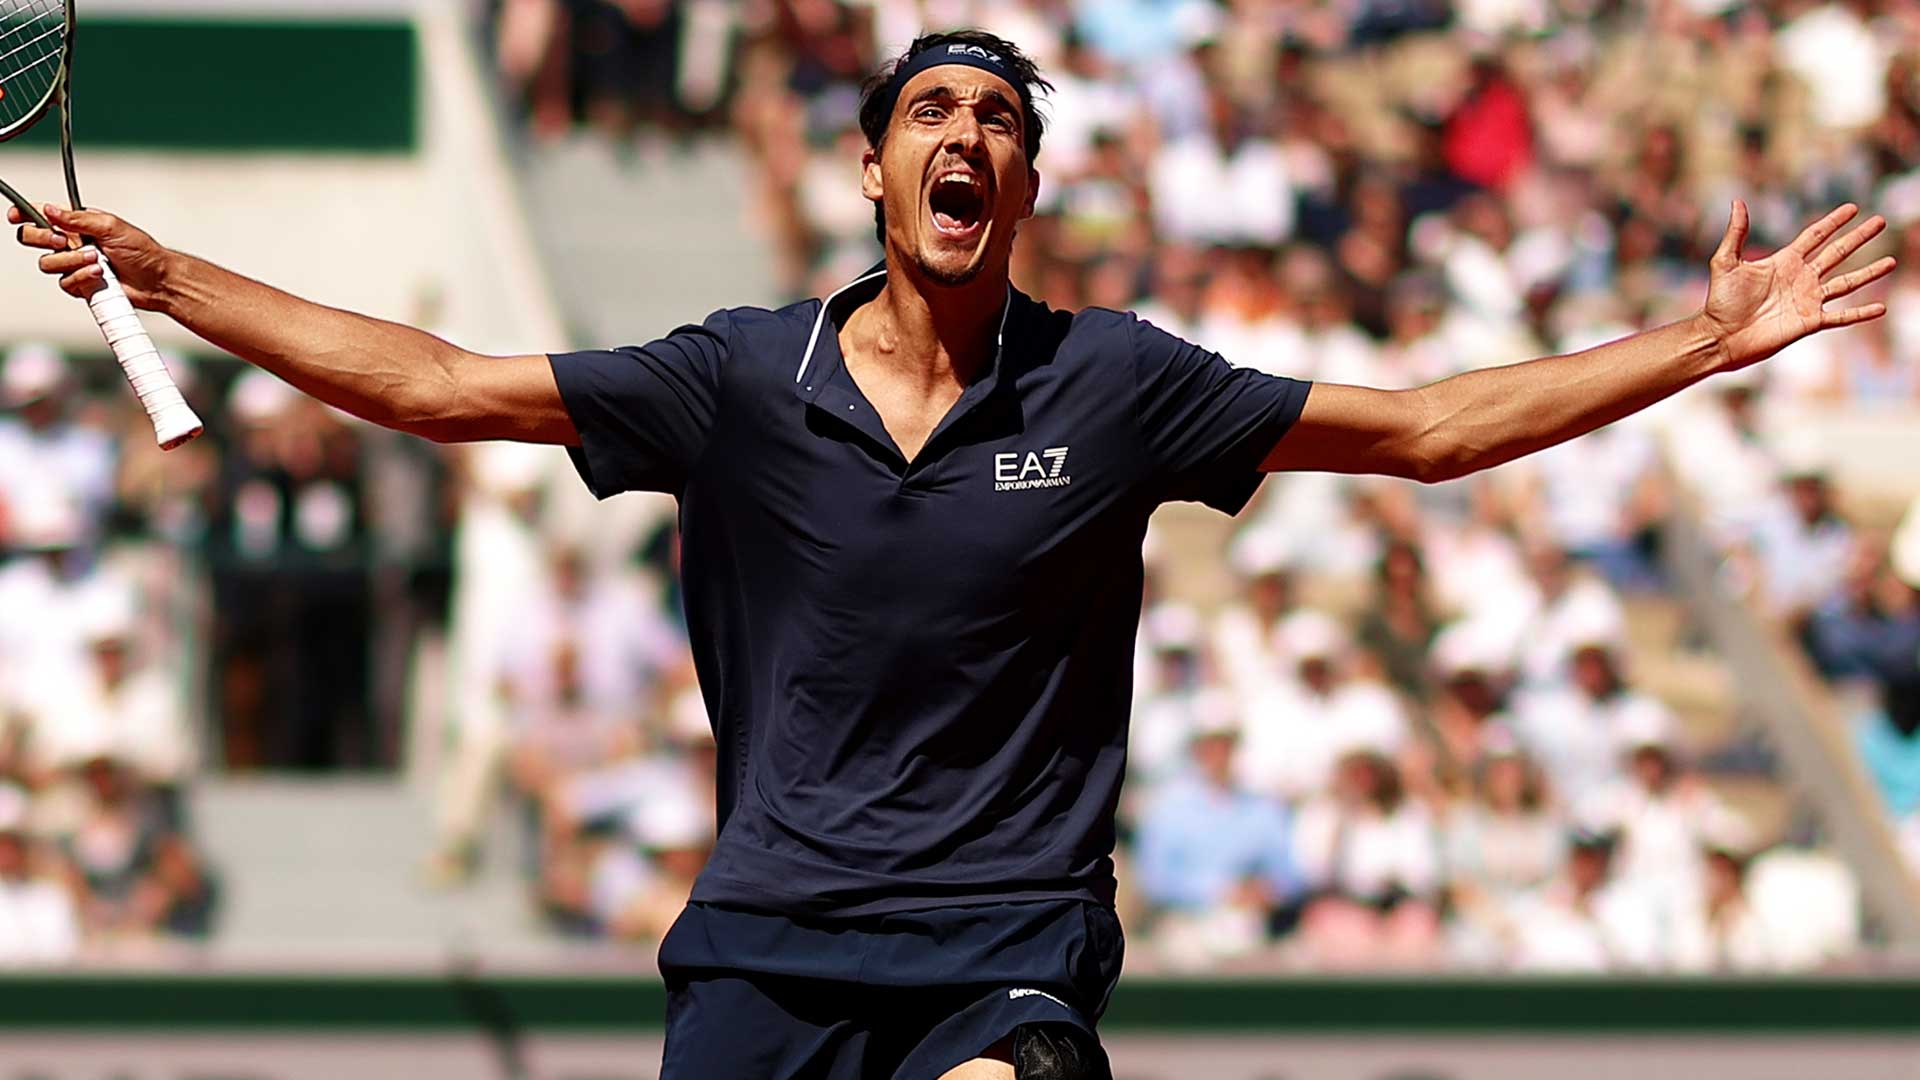 Lorenzo Sonego celebrates earning his sixth Top 10 win on Friday at Roland Garros.